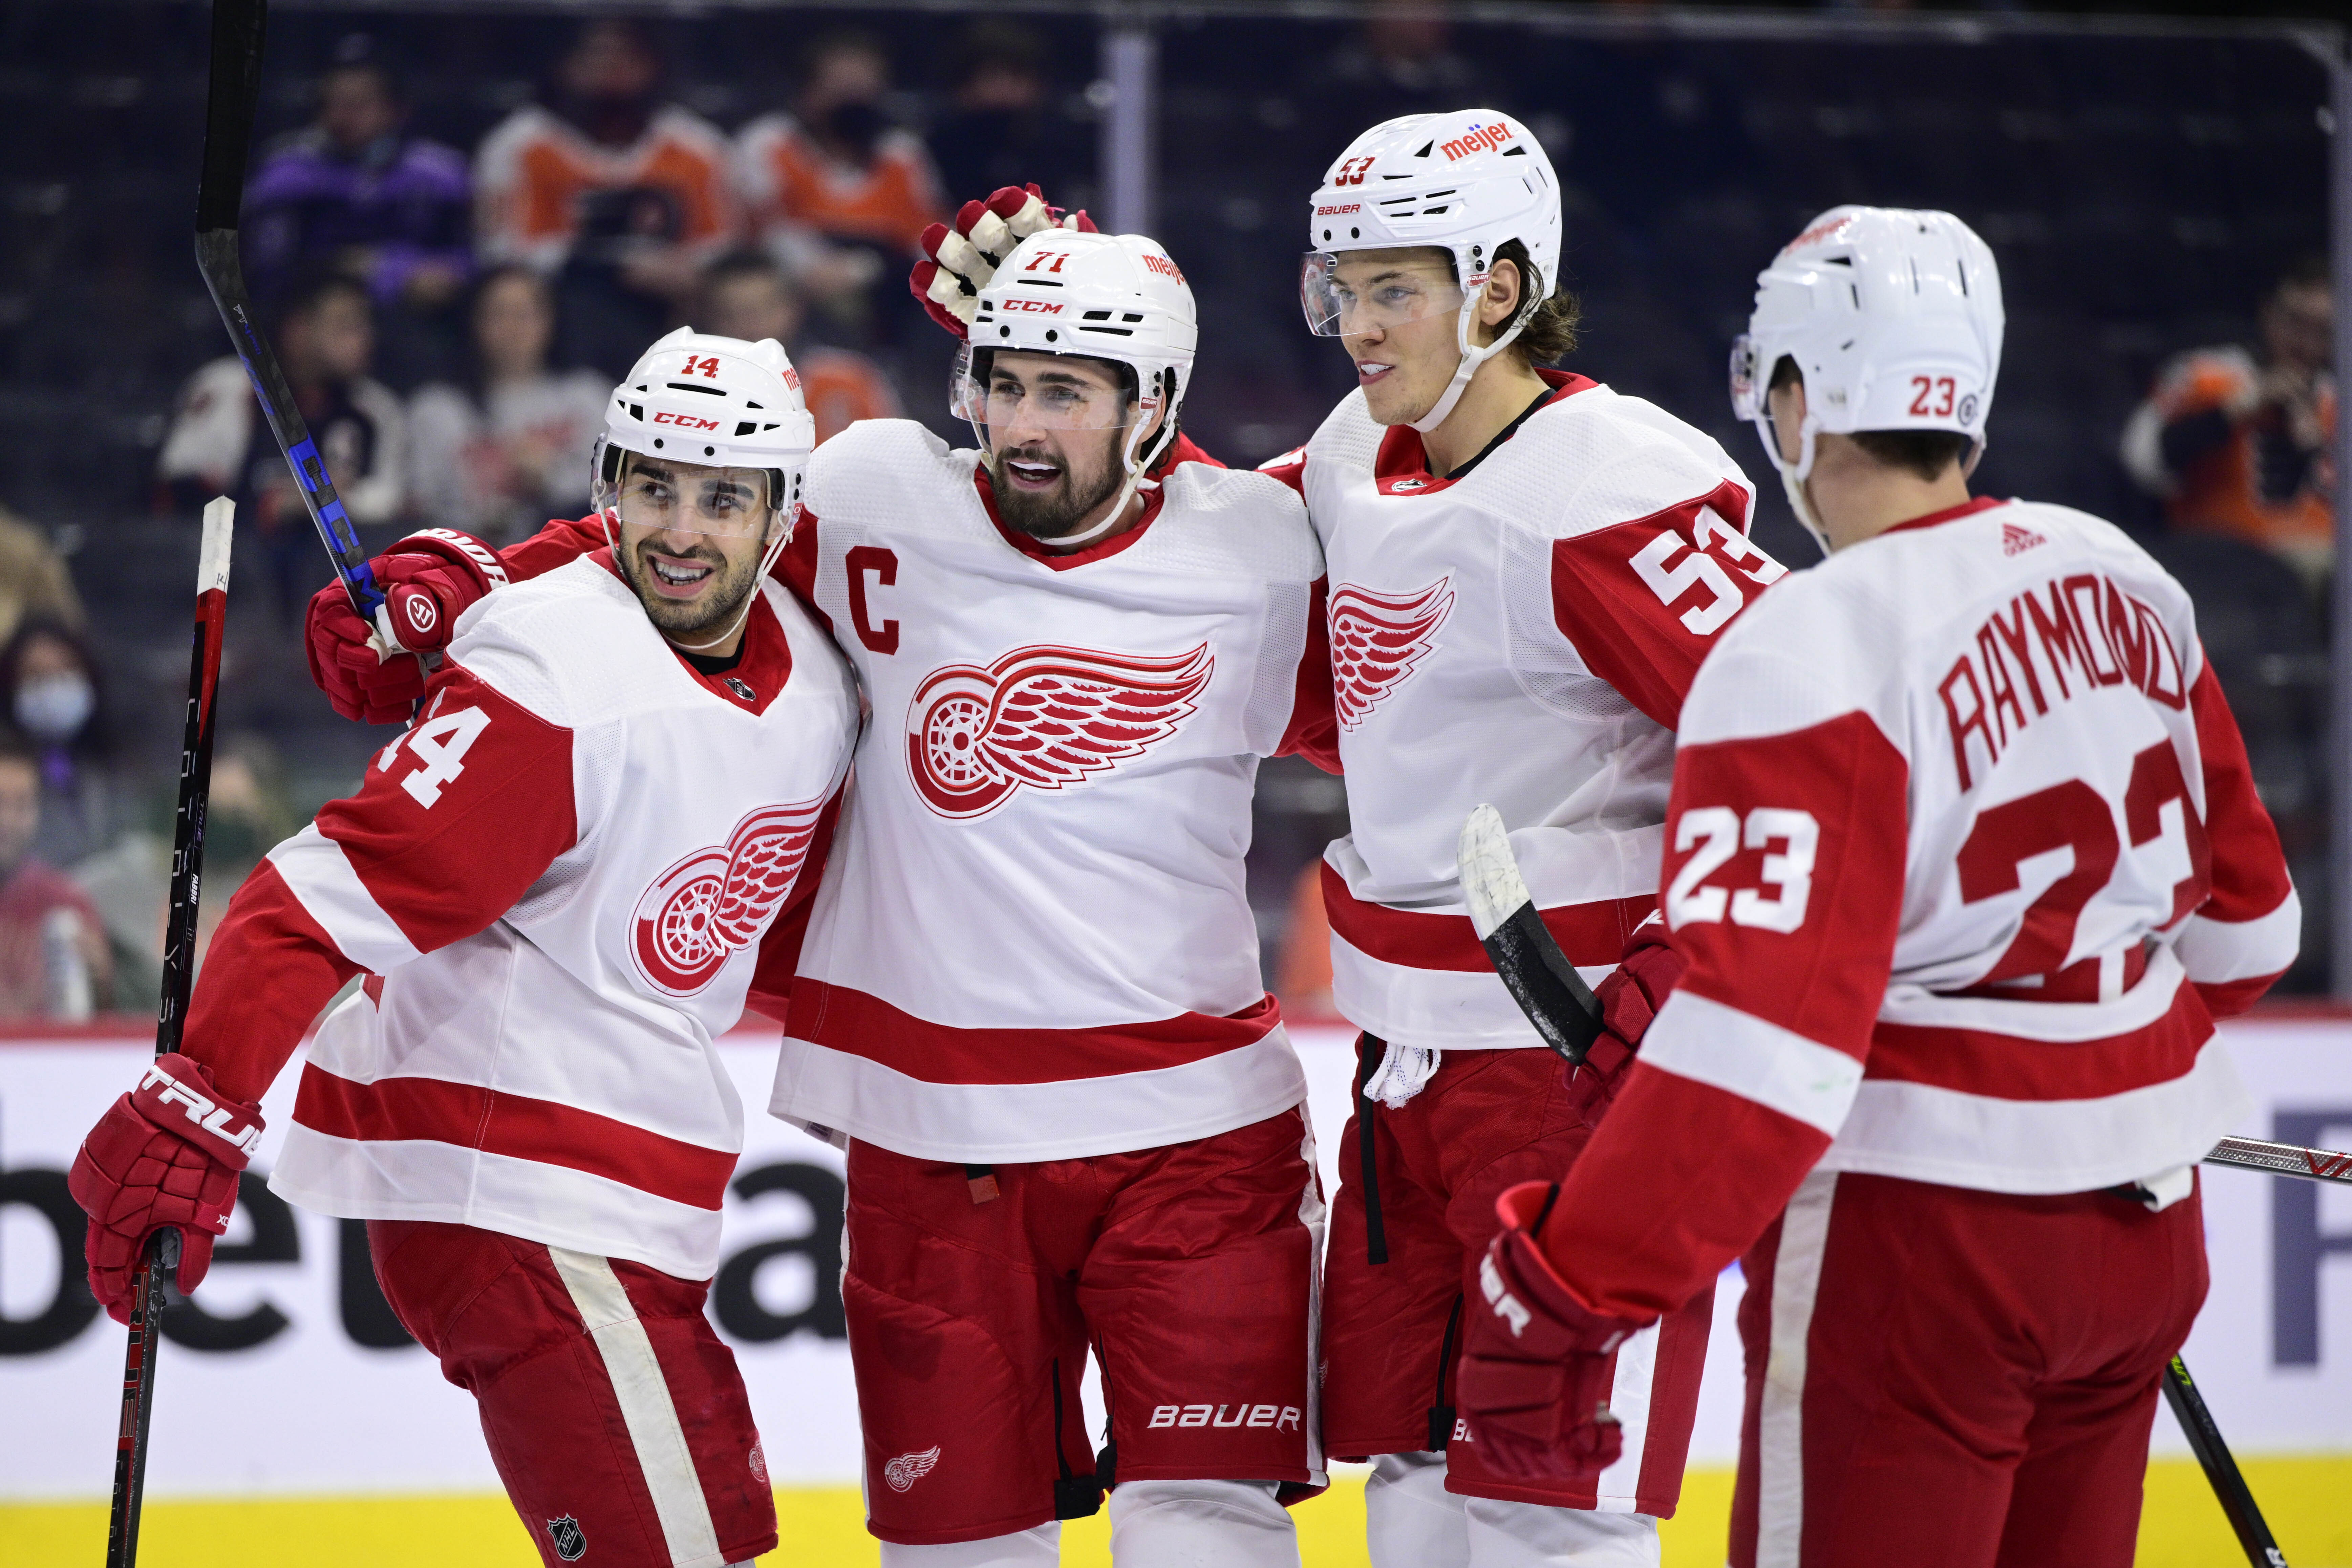 Detroit Red Wings announce Traverse City training camp dates